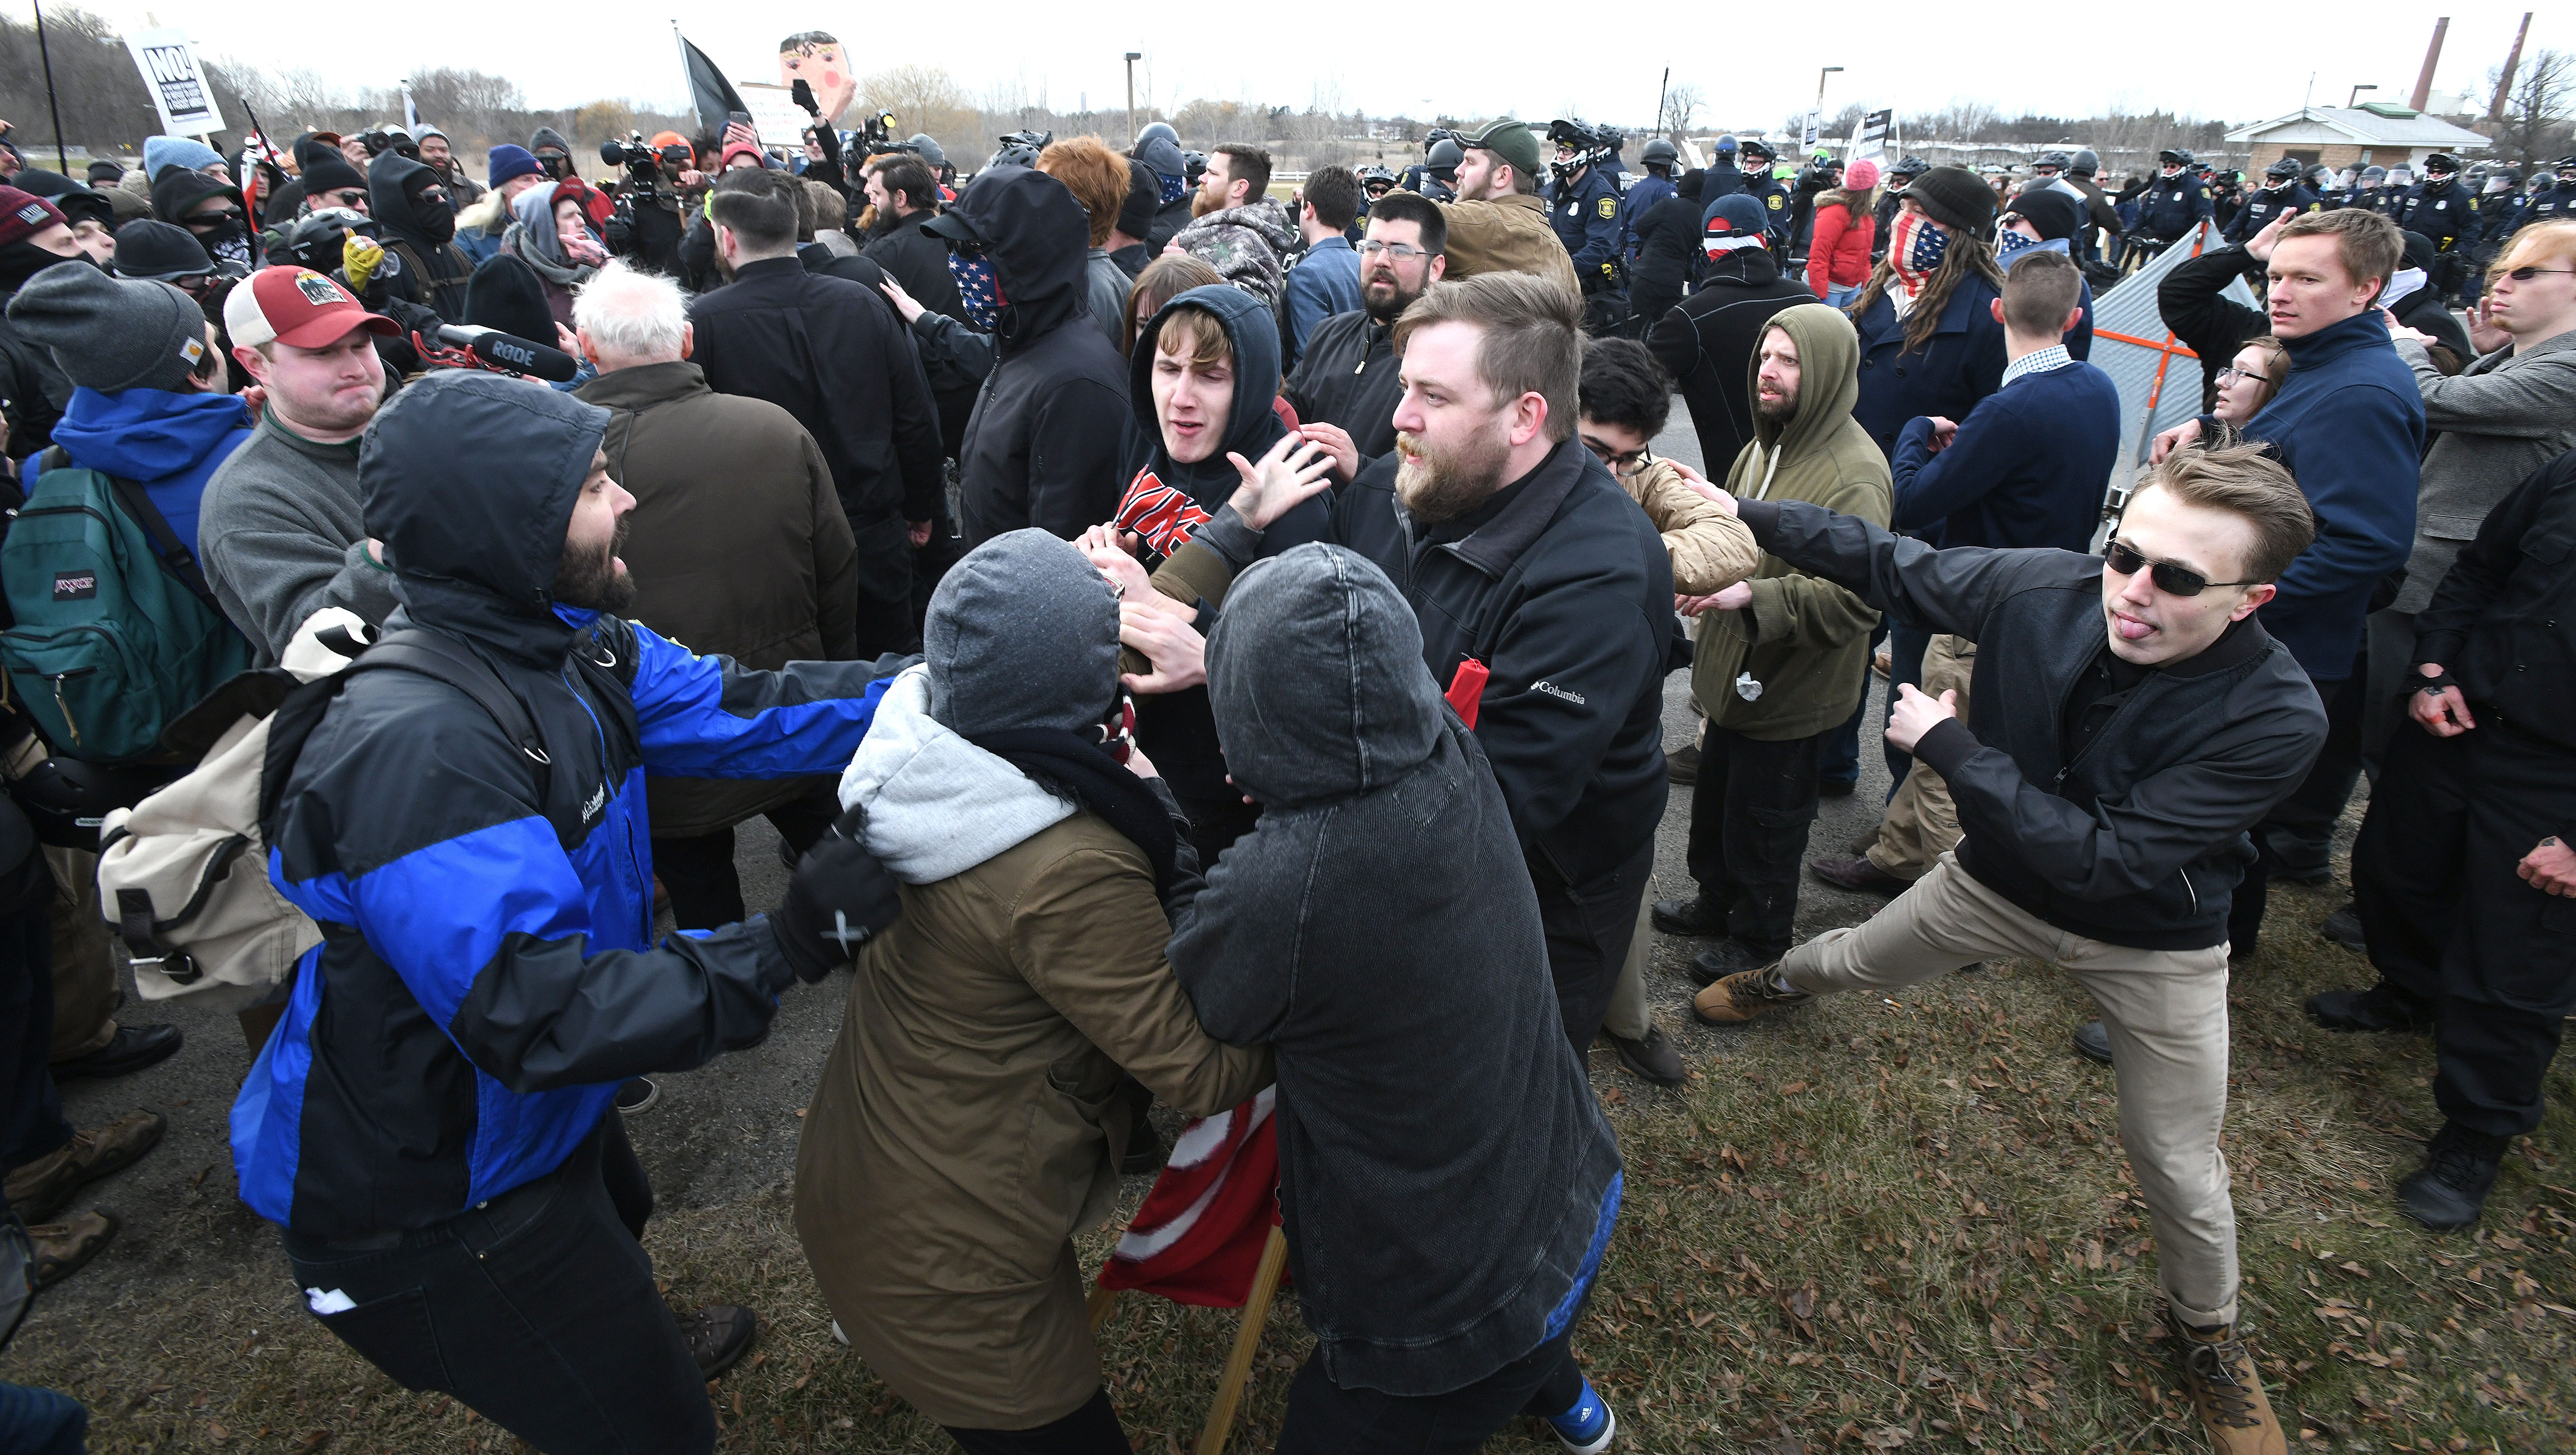 Protesters clash with Spencer sympathizers (right side) outside the MSU Pavilion.